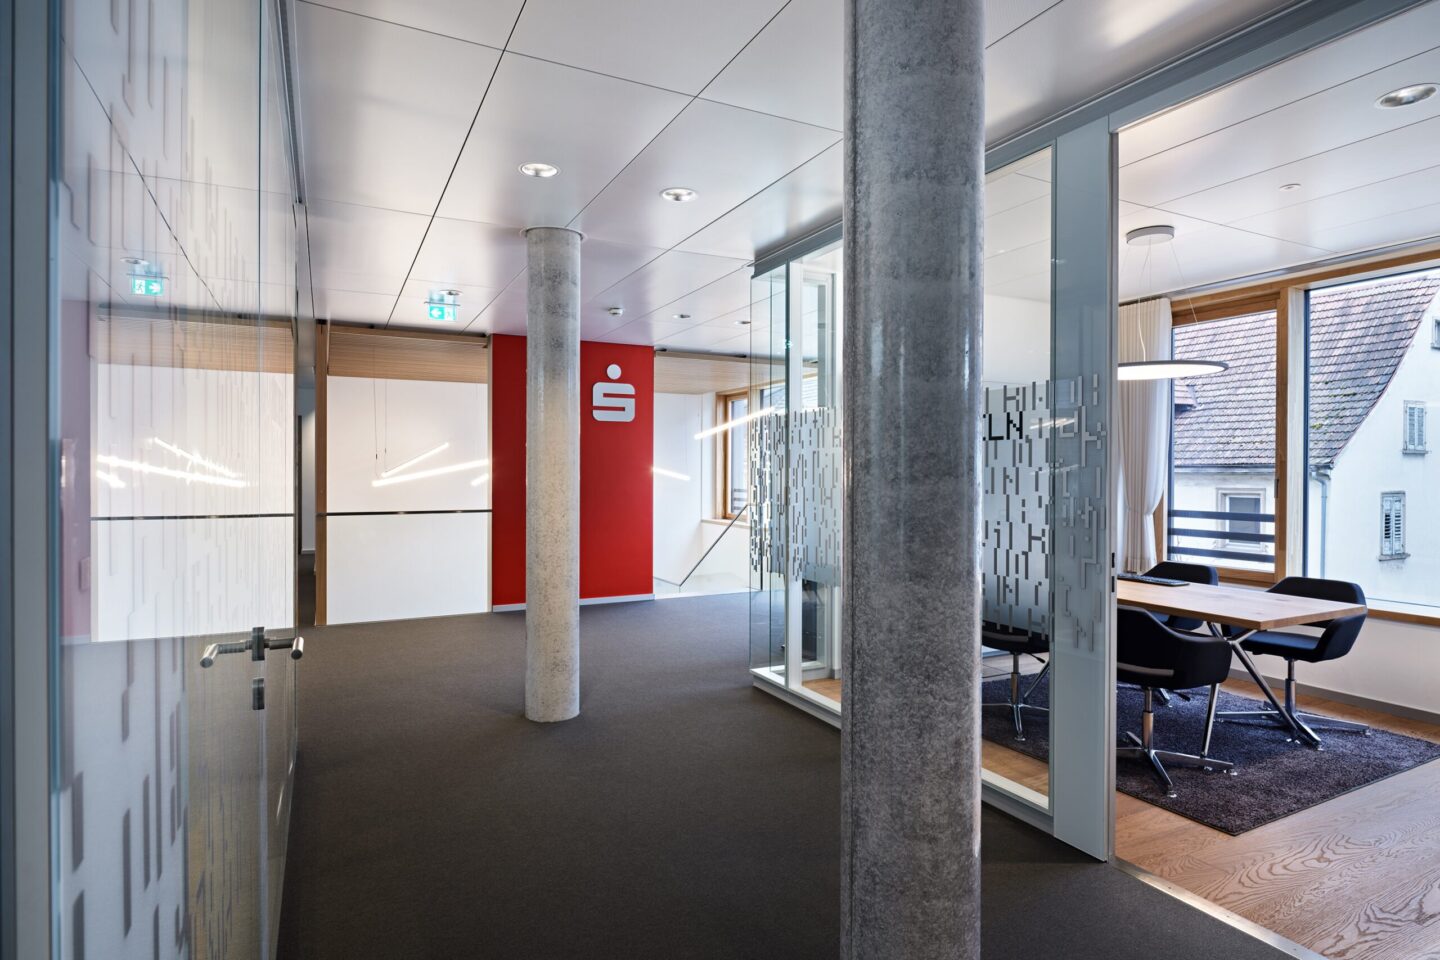 System walls from feco │ Sparkasse Hochrhein │ glass elements with anodised aluminum profiles